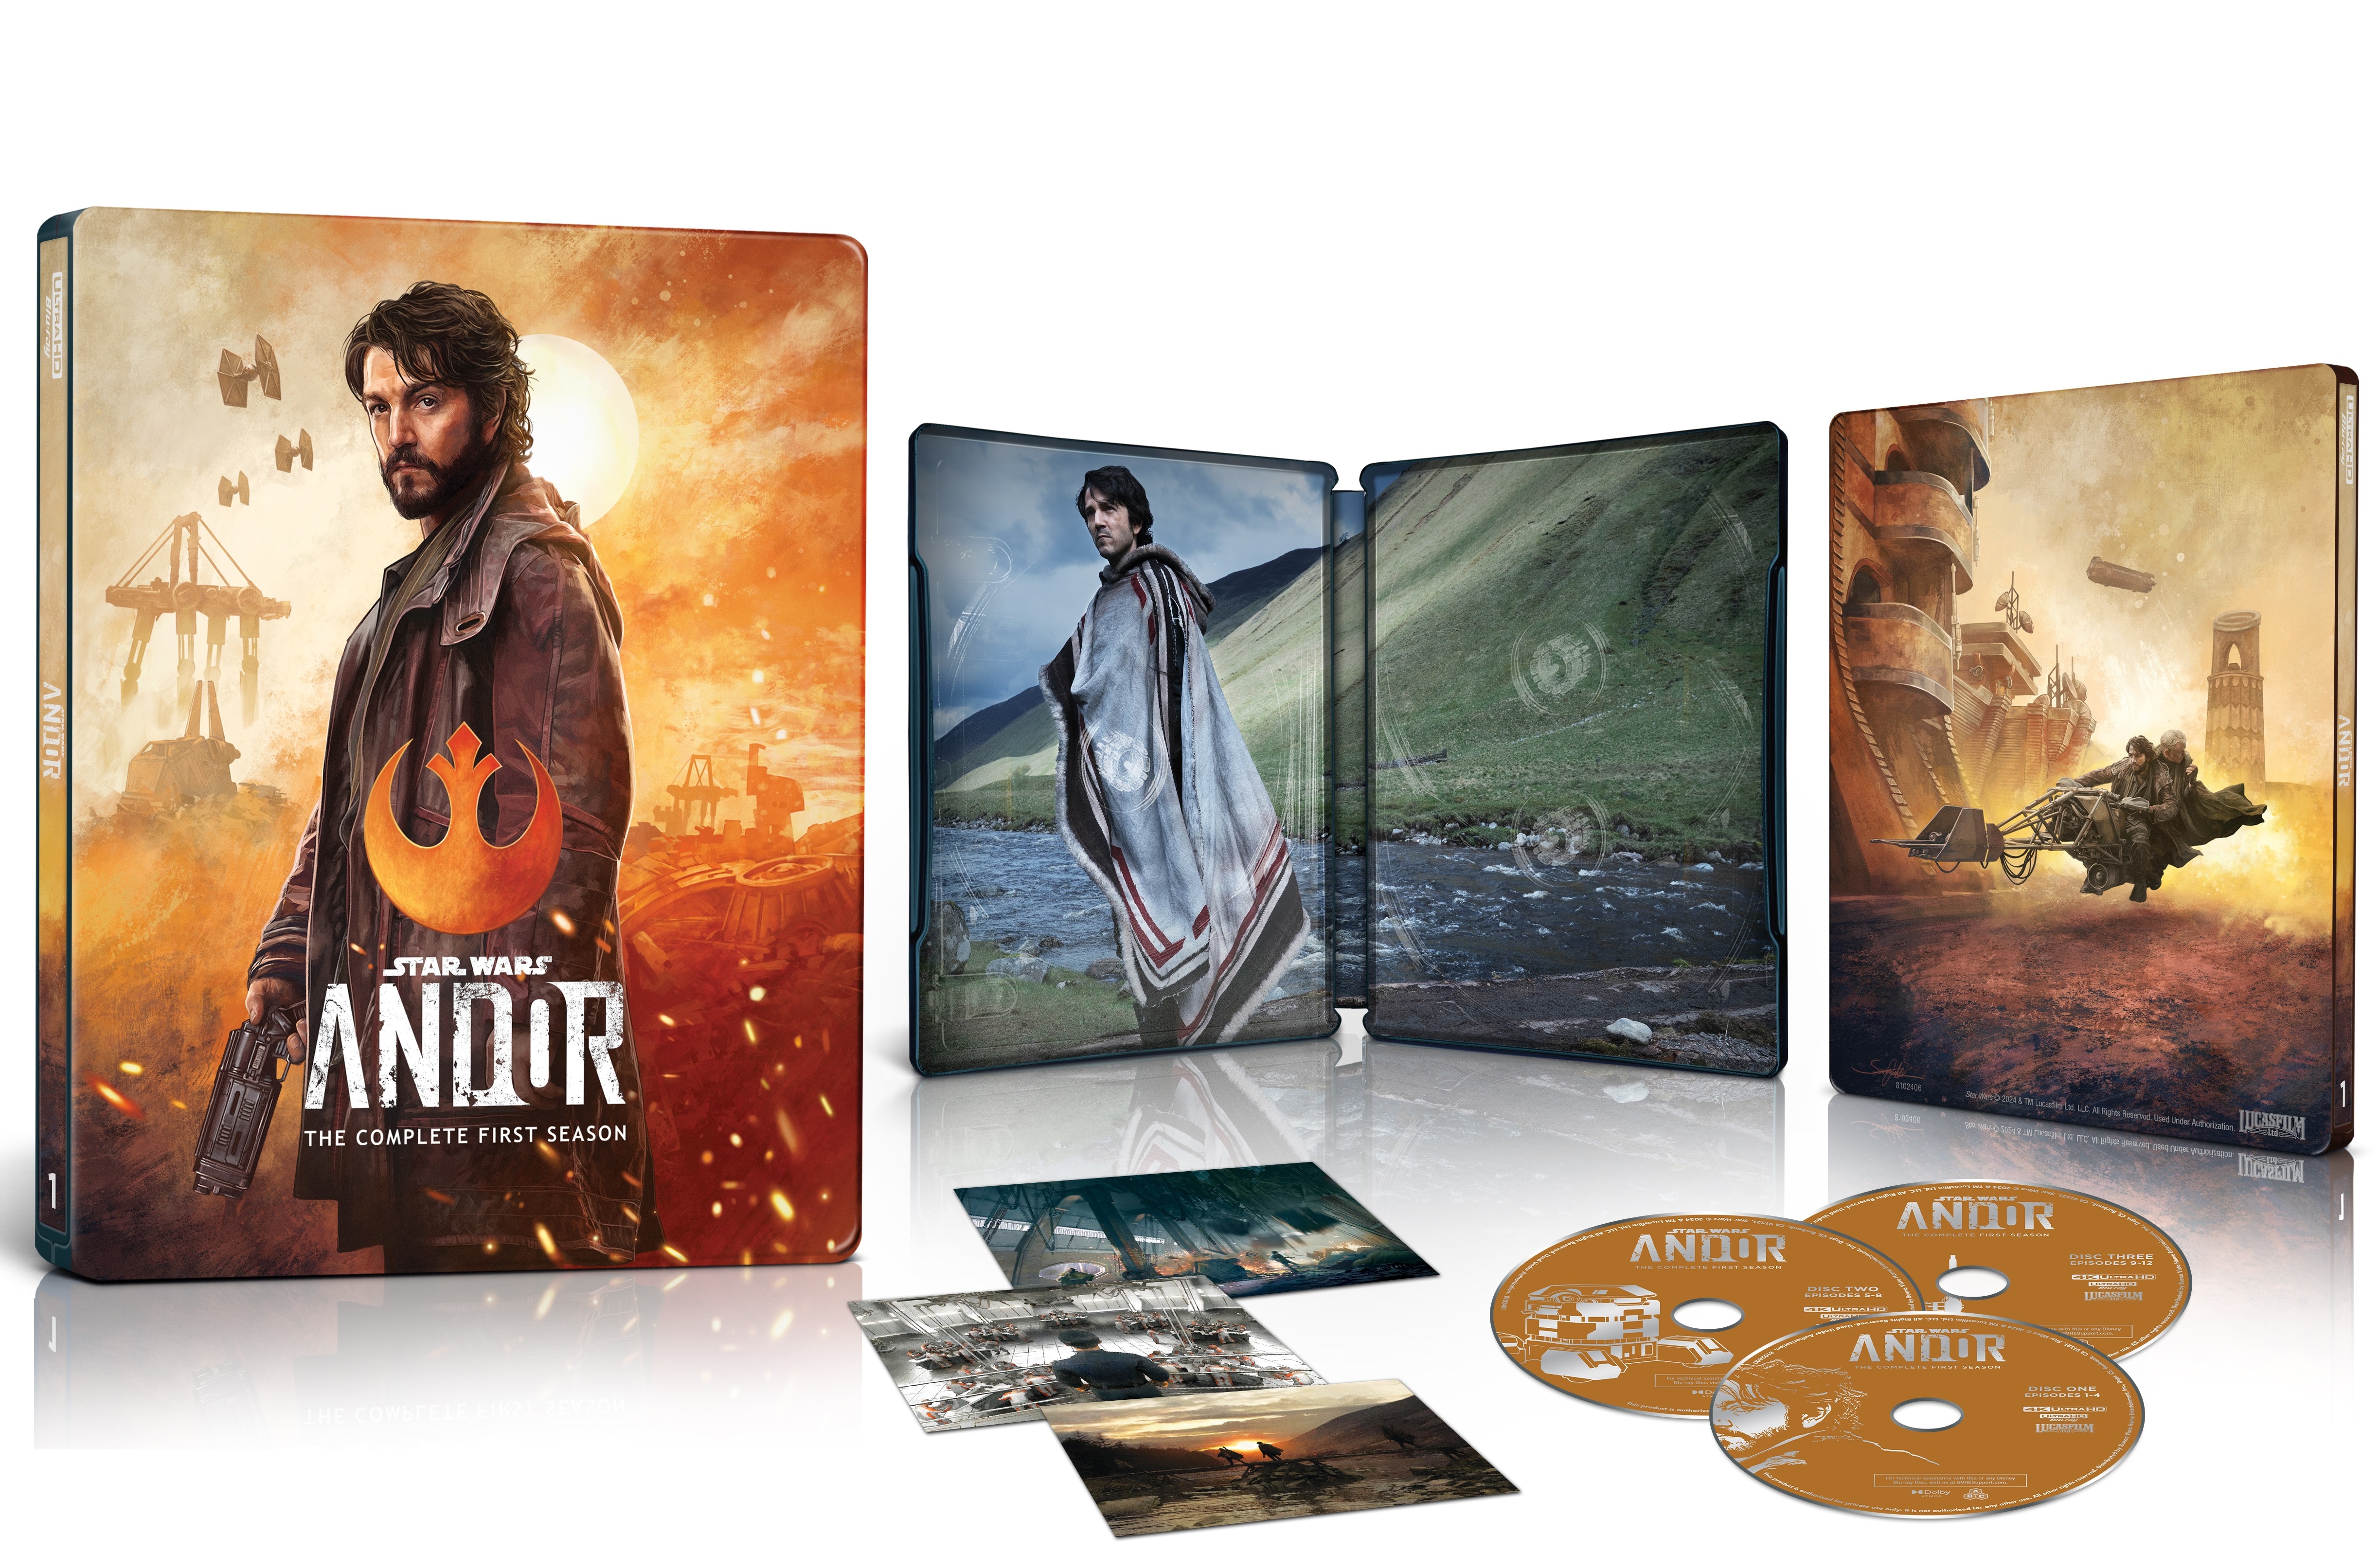 Andor: The Complete First Season (4K Ultra HD) (Steelbook) - image 1 of 3